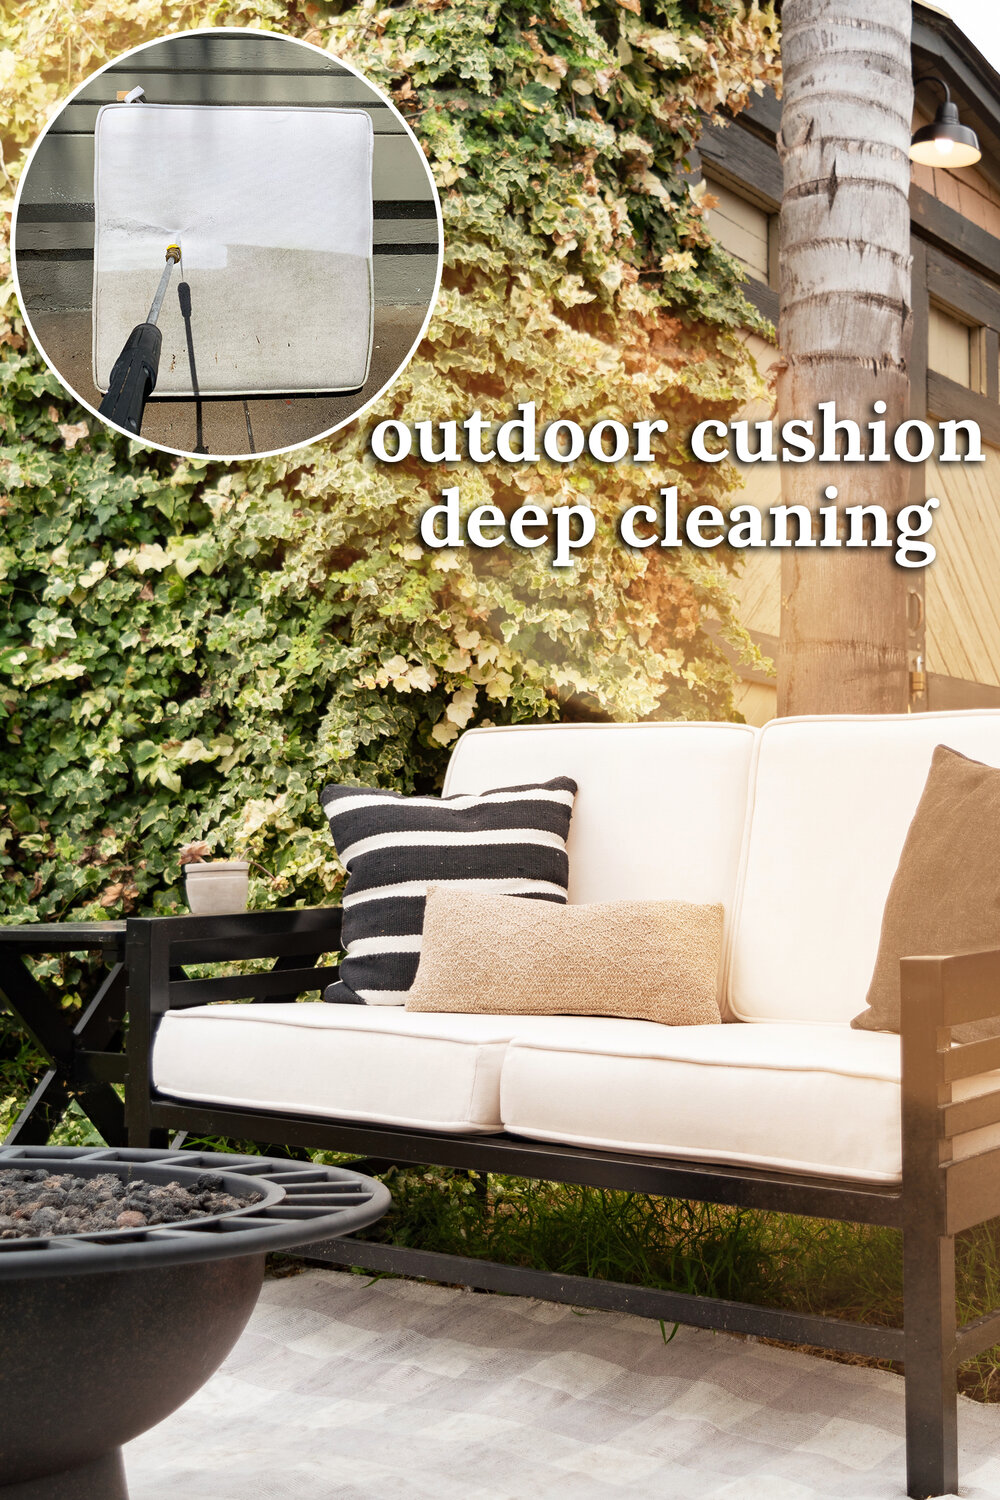 Pressure Washing My Outdoor Cushions, How Do I Wash My Outdoor Cushion Covers